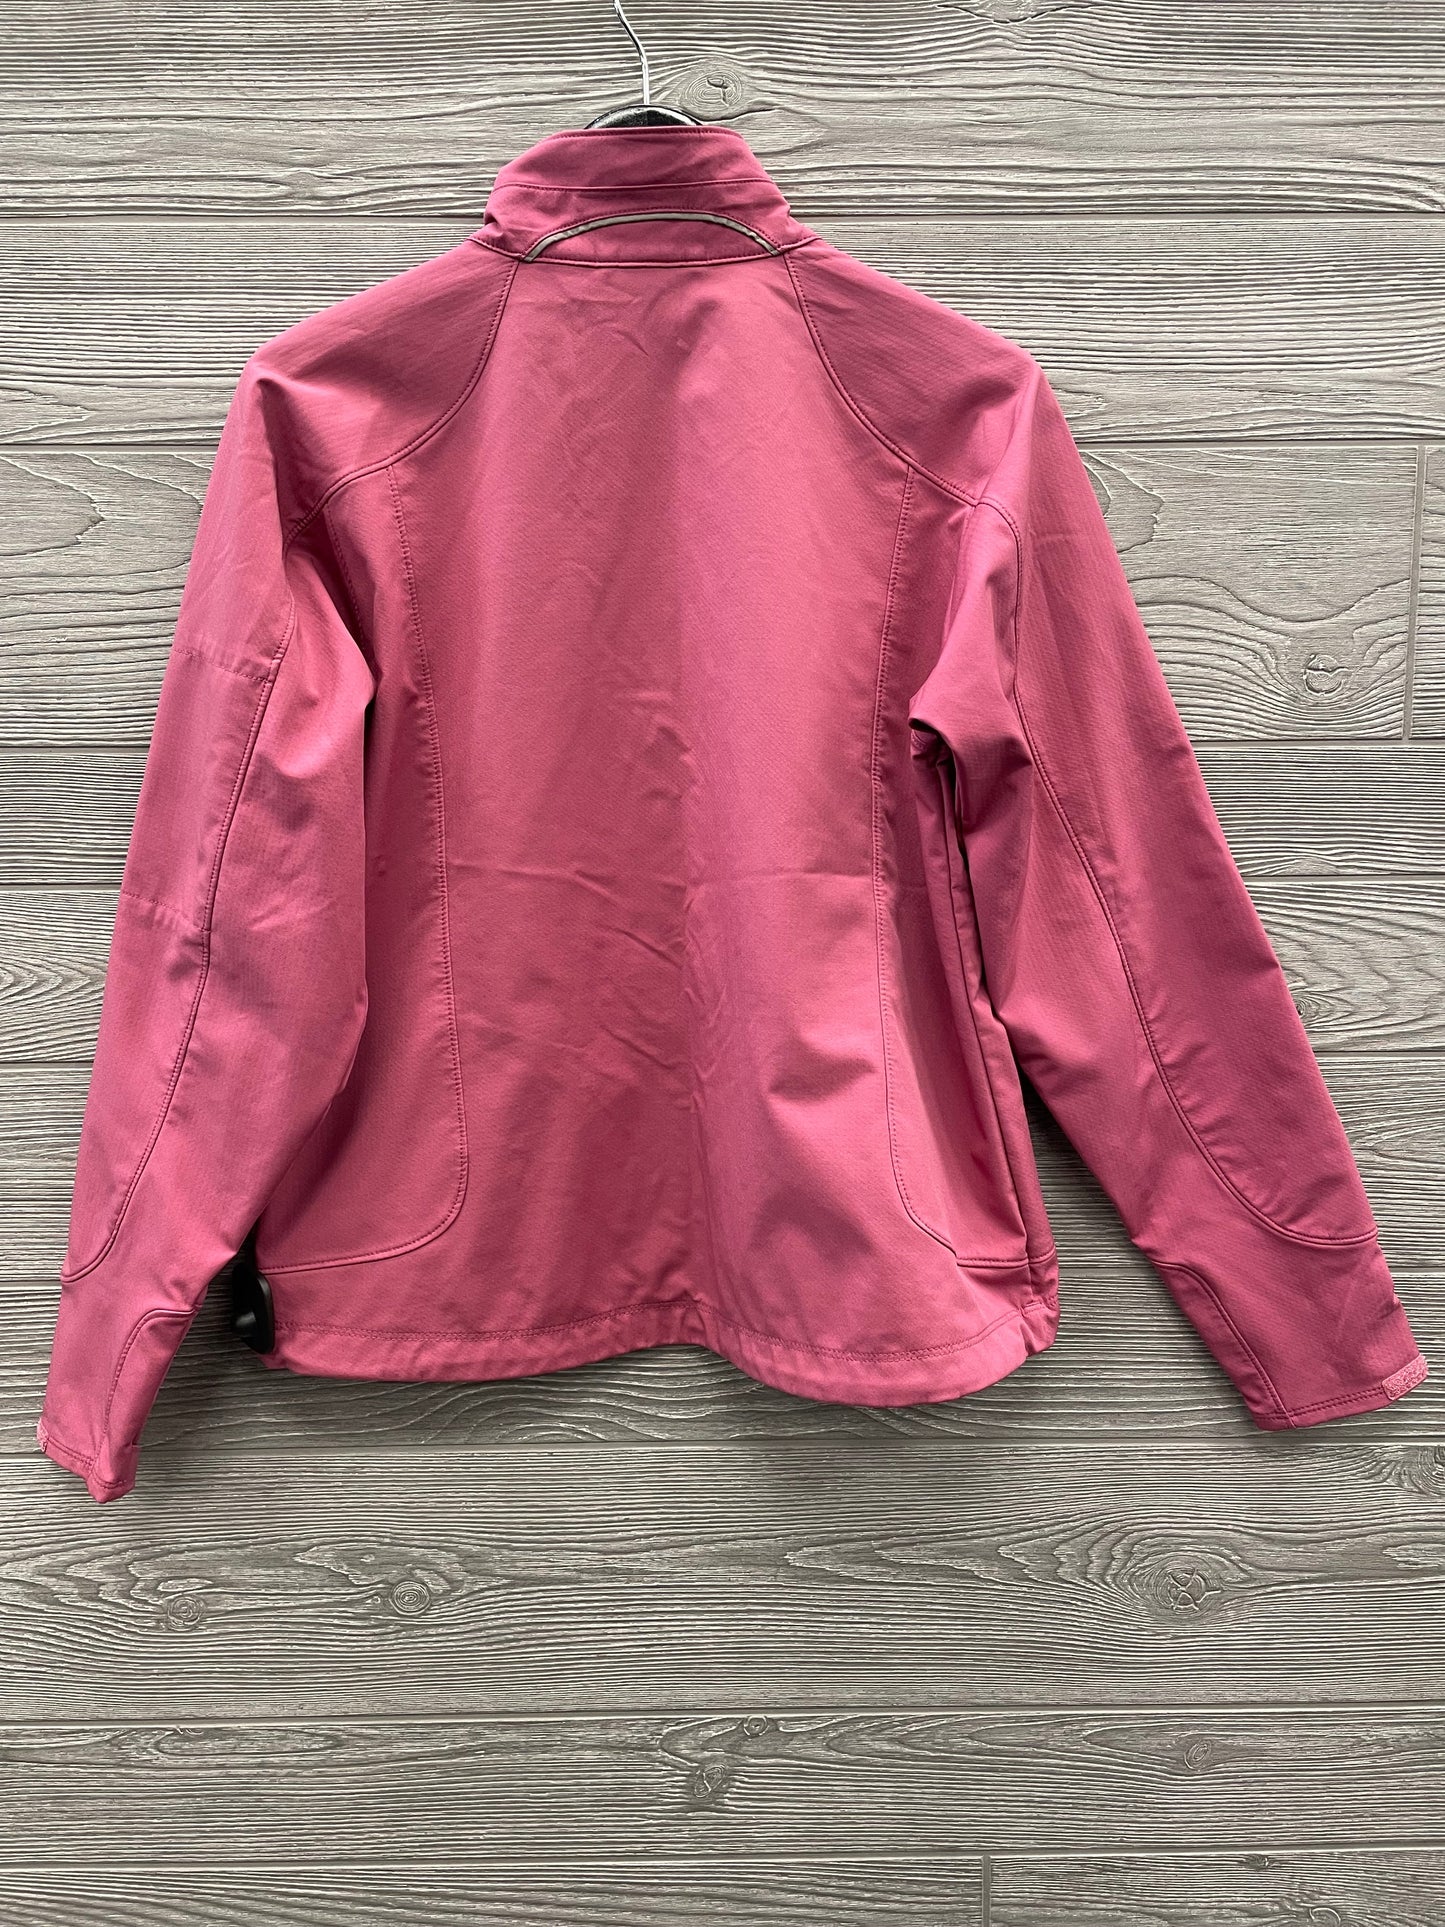 Athletic Jacket By Ll Bean  Size: M